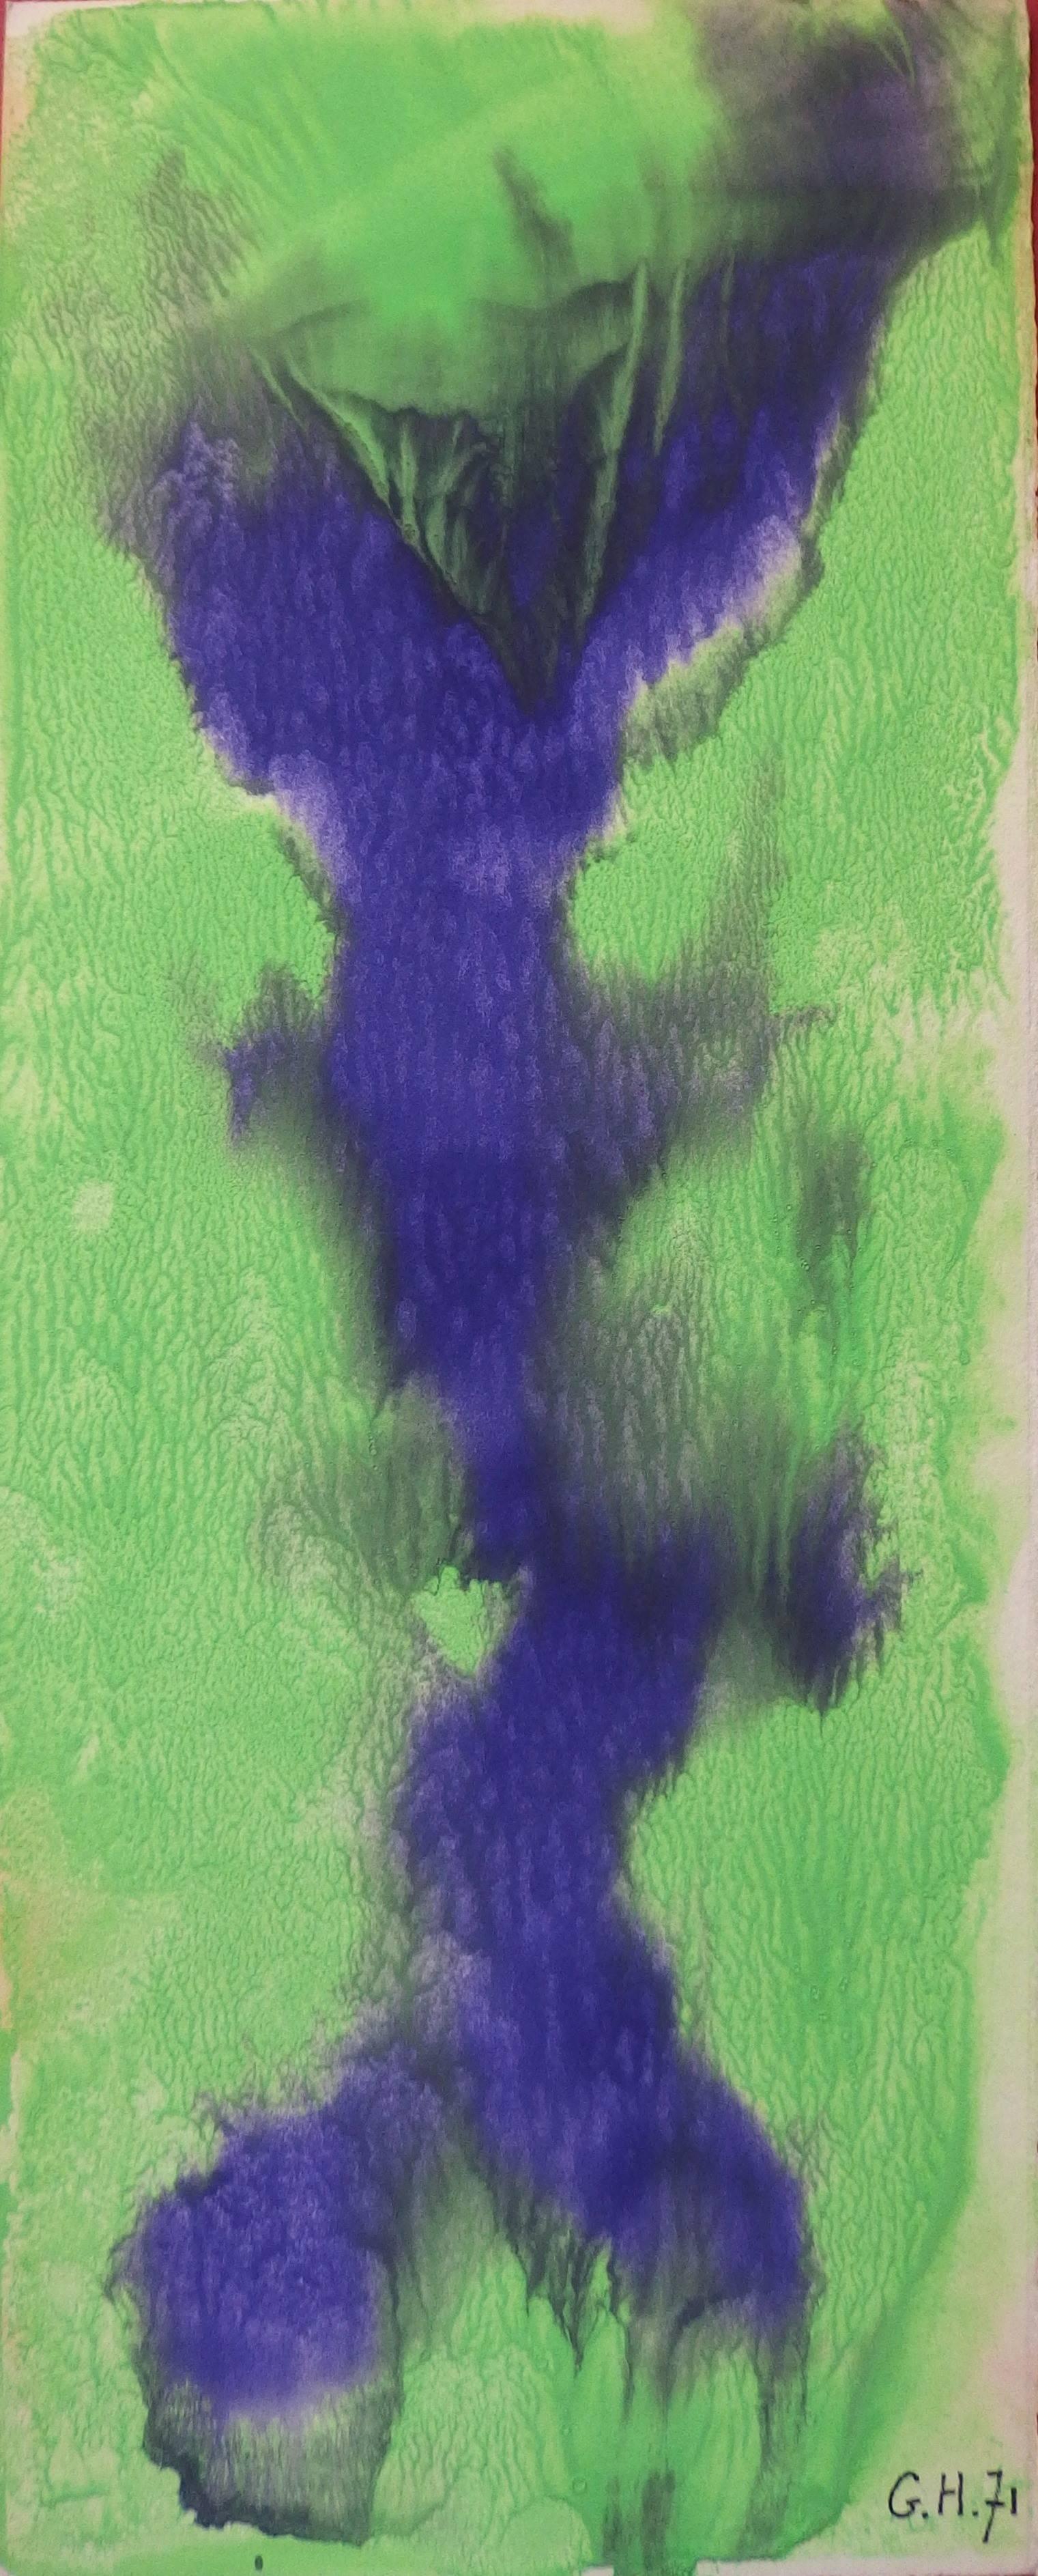 Georges Hugnet Abstract Drawing - Green Freshness - Original handsigned gouache